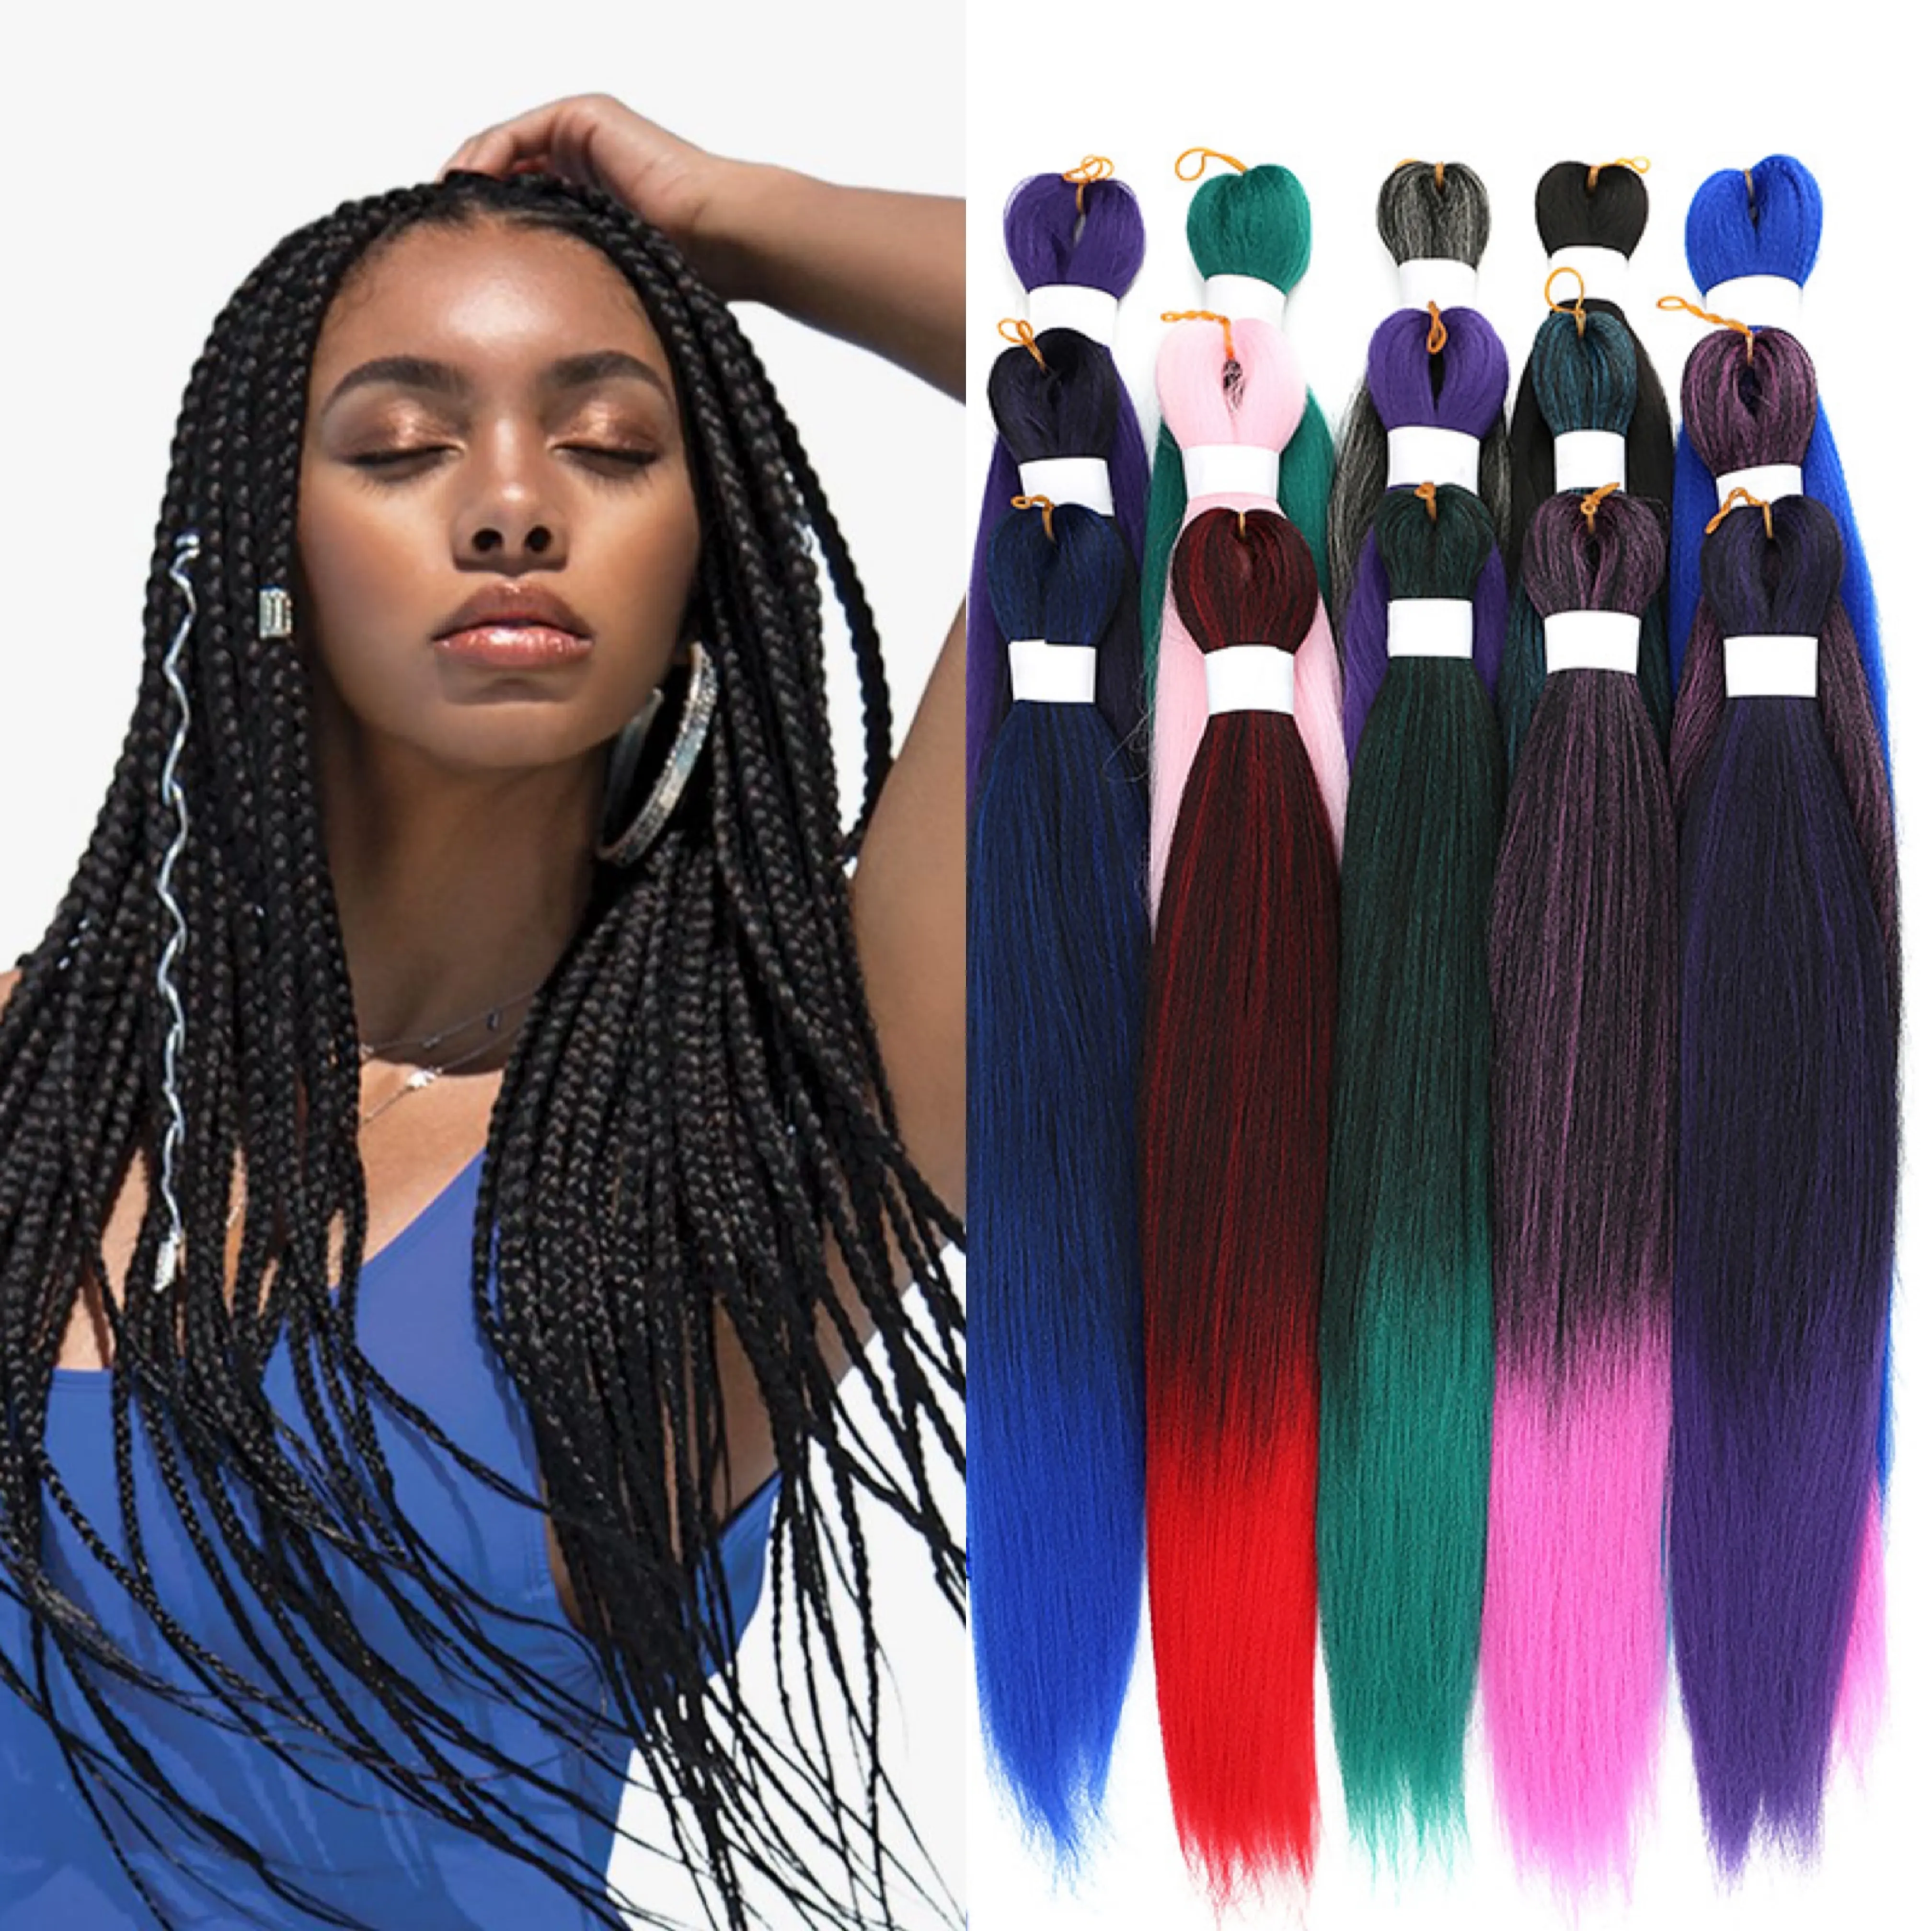 Hot Sale Synthetic Pre Stretched Yaki Ombre Braiding Hair For Wholesale Braid Hair Prestretched Braiding Hair Extension